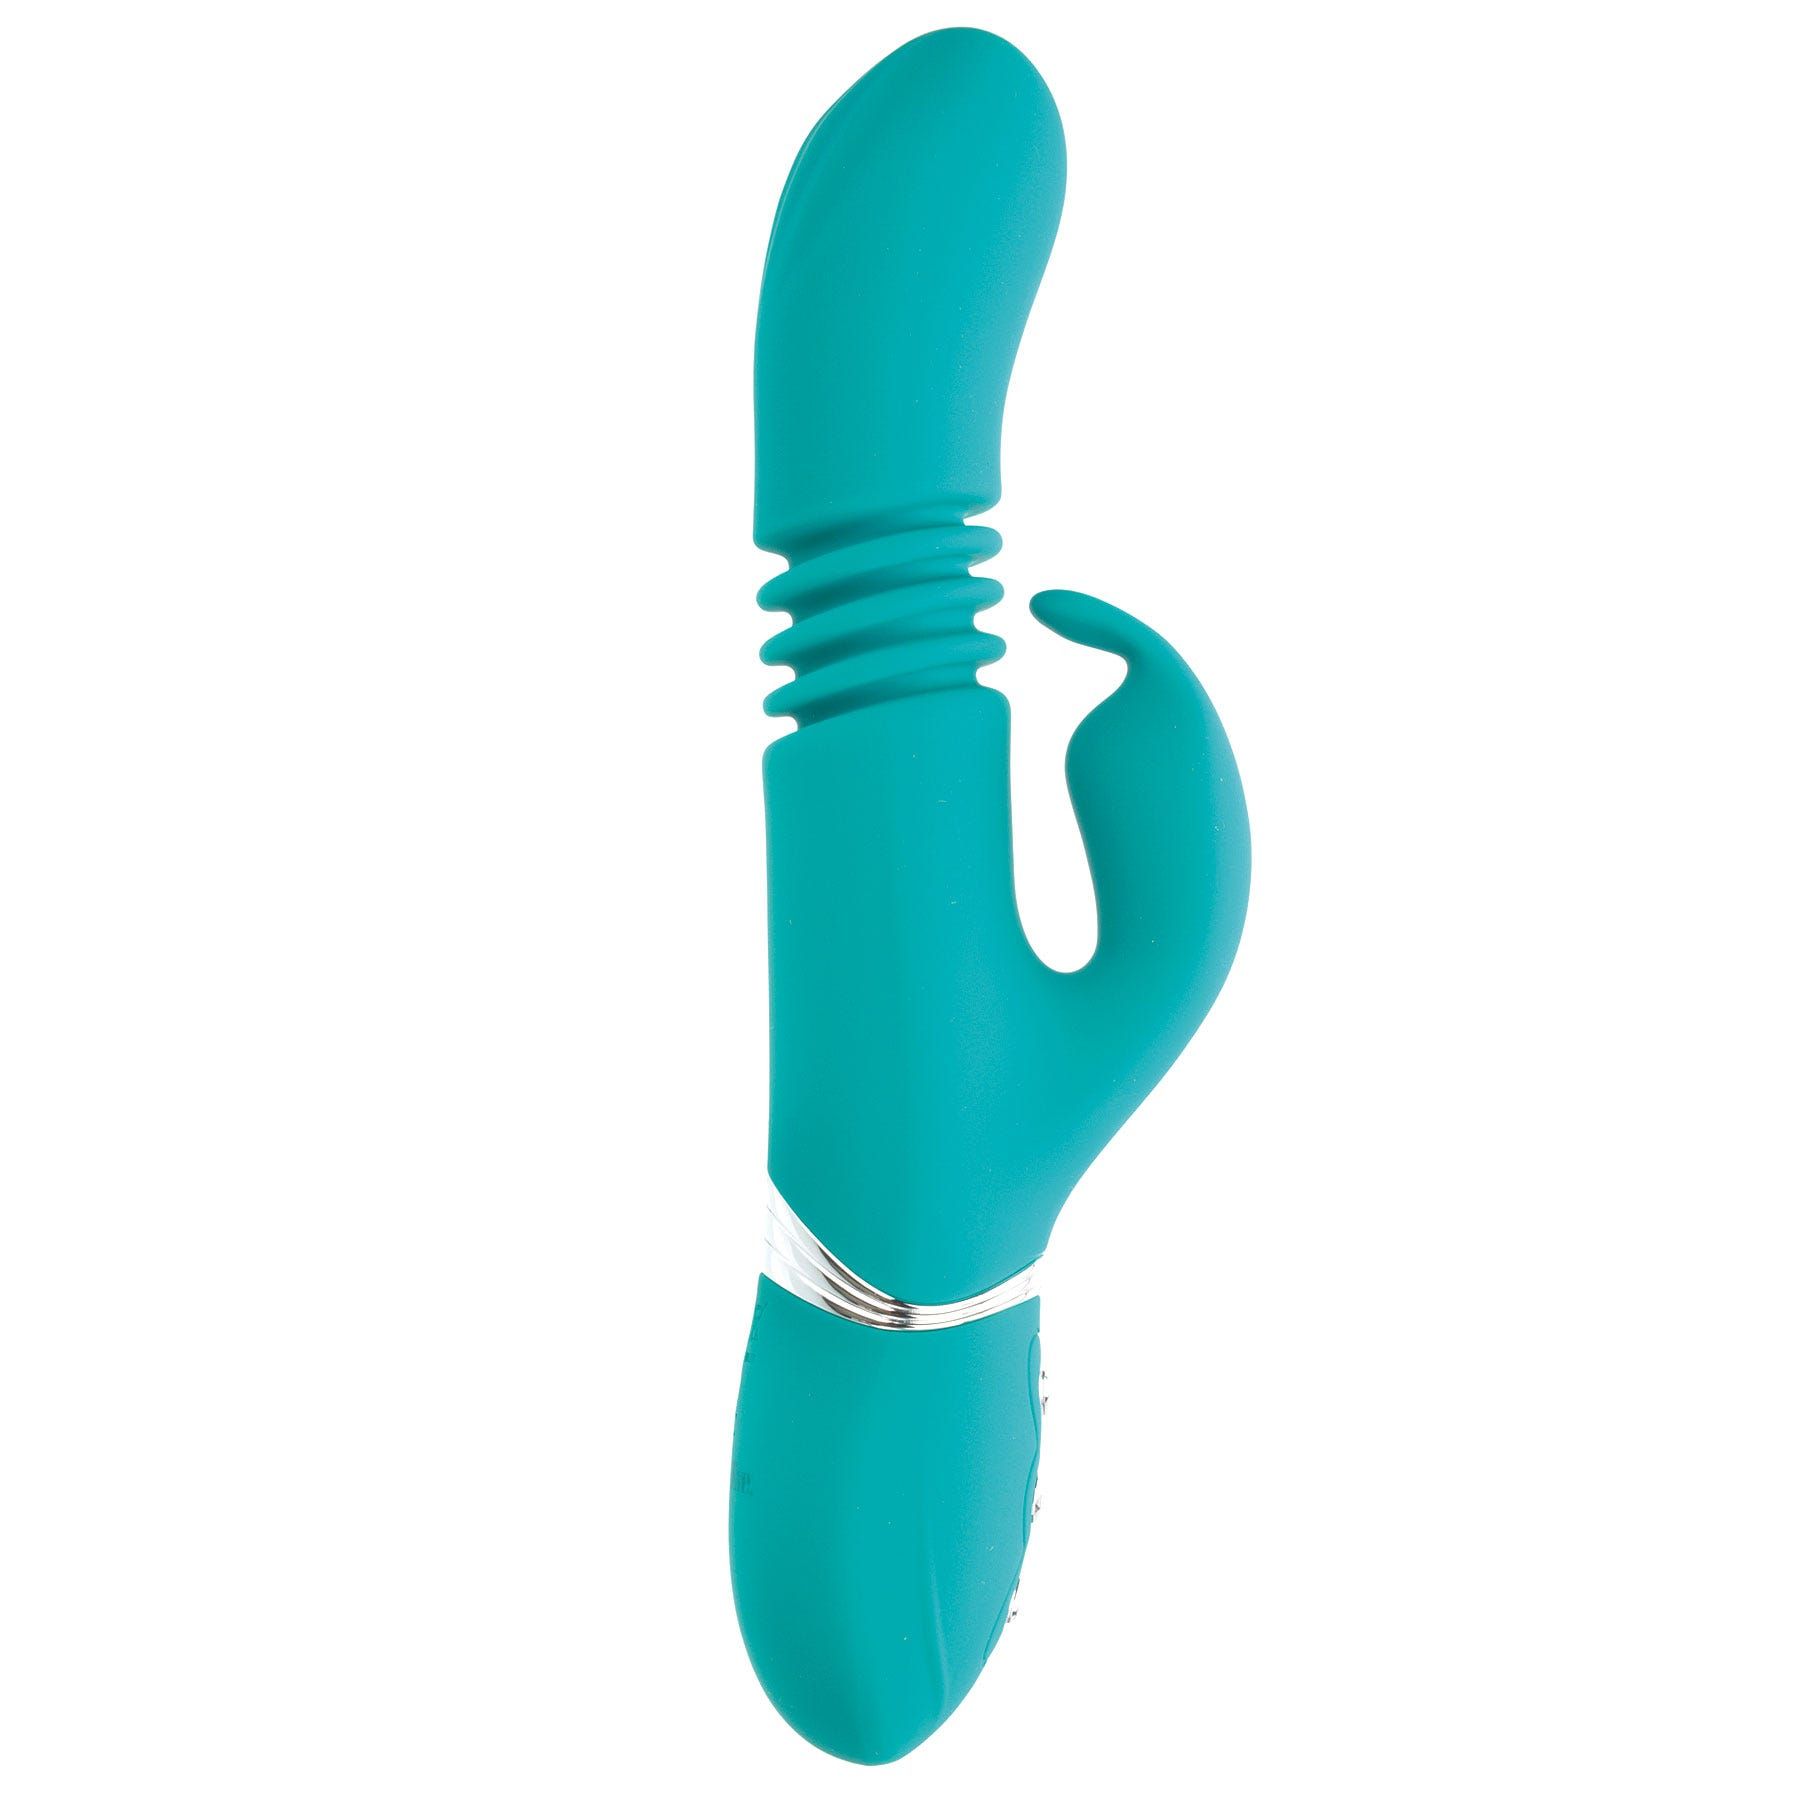 Eve's Rechargeable Thrusting Rabbit